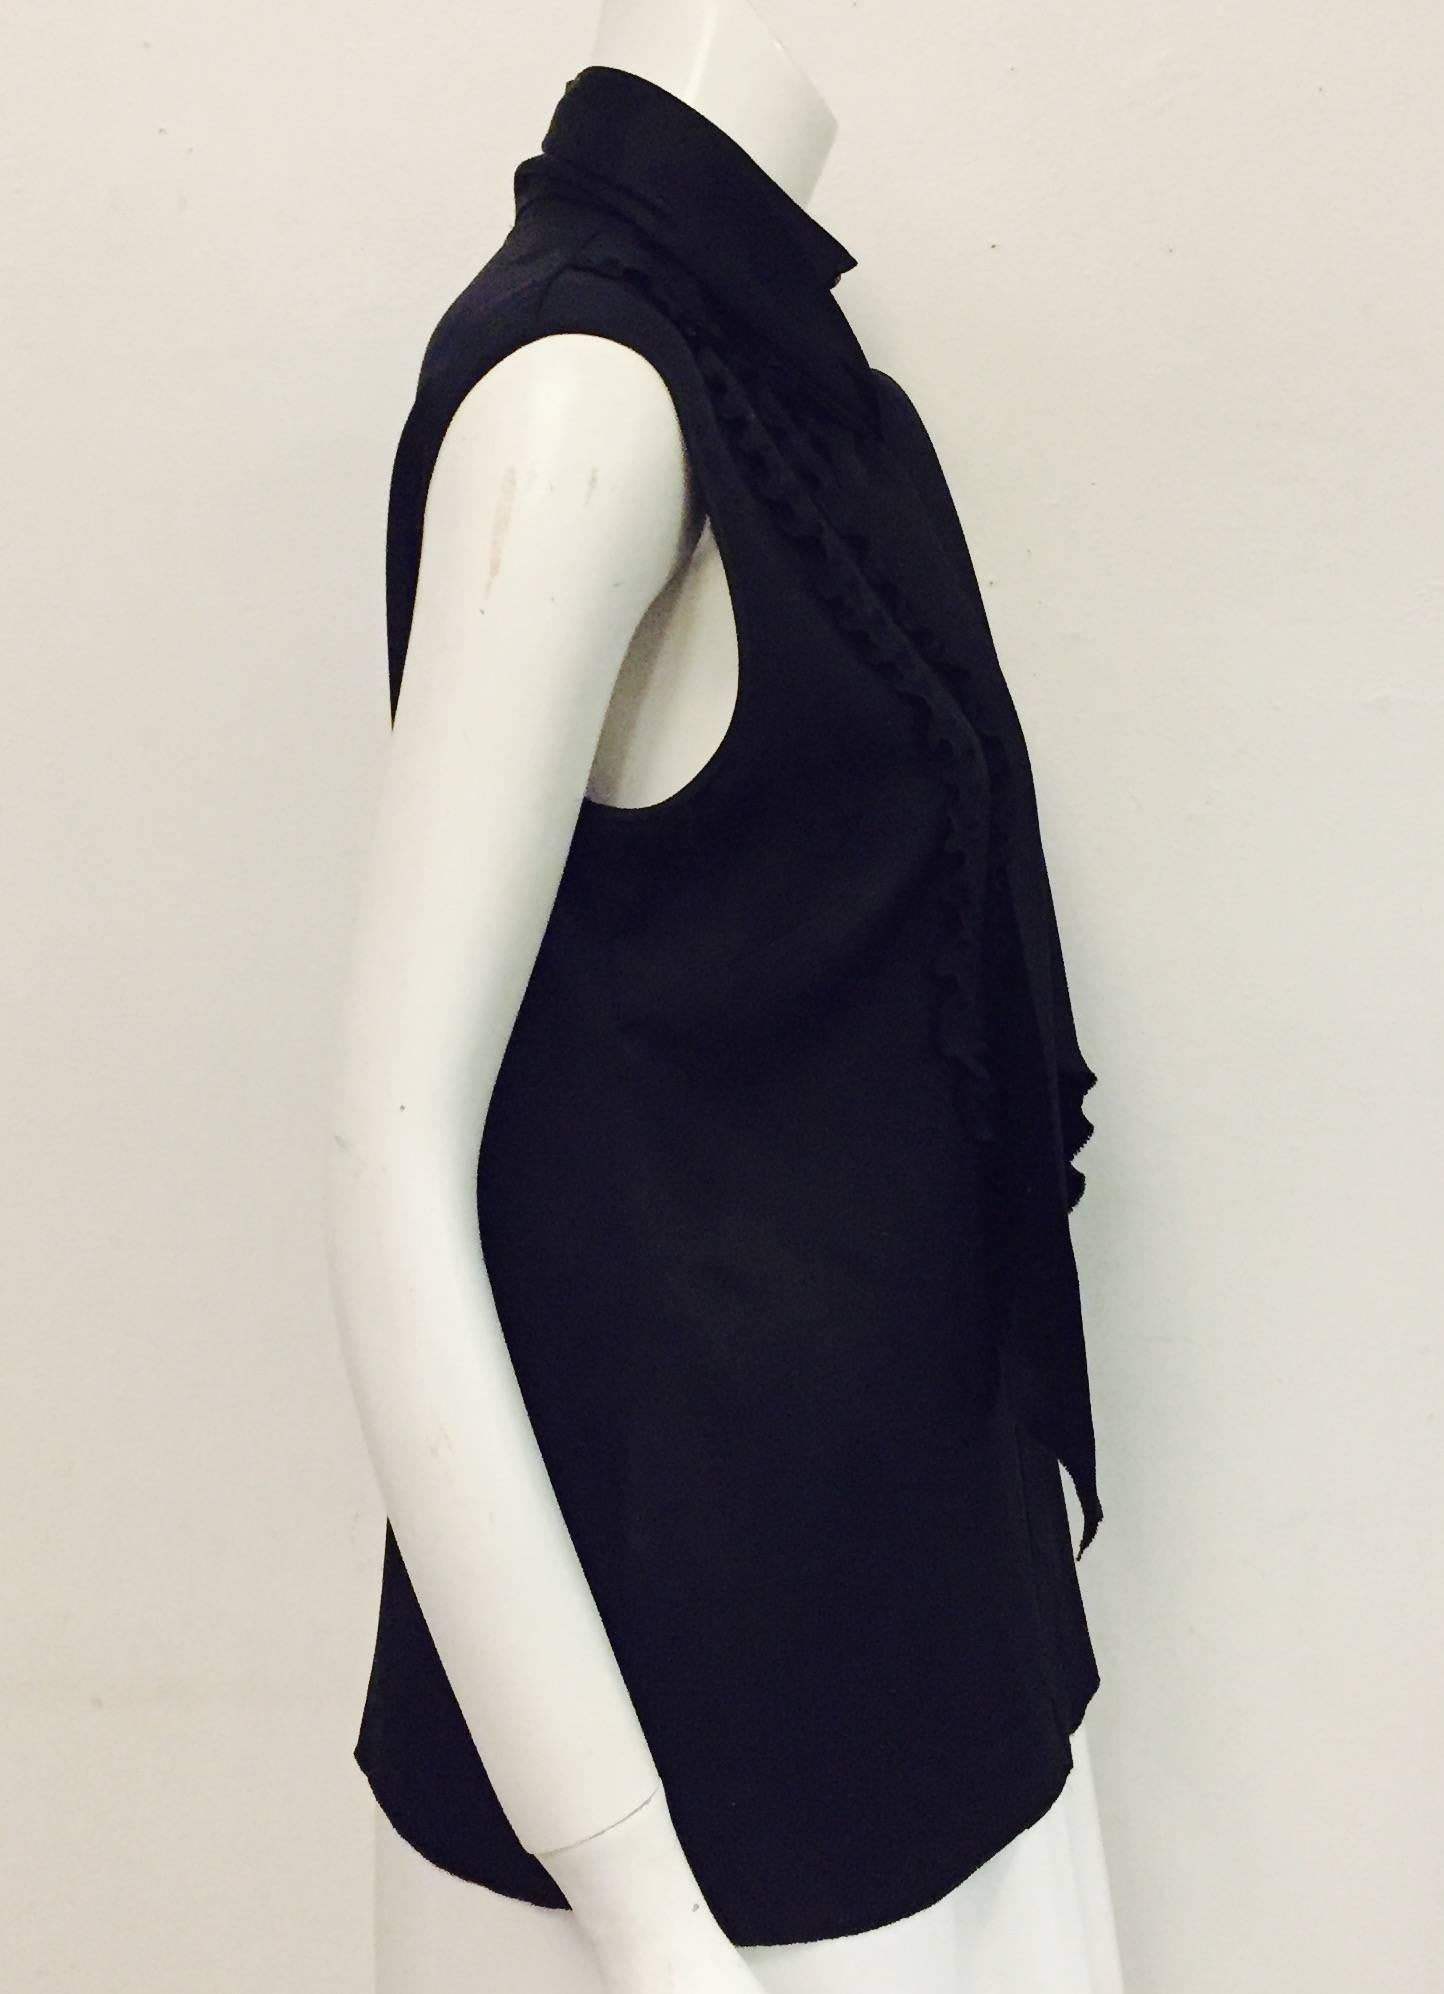 This charming Chanel black silk sleeveless tuxedo style top takes the top hat, pun intended!   Three ruffles on each side of the blouse meeting at the center of blouse with hidden closure and 9 Chanel logo buttons.  Possesses an up collar with 3